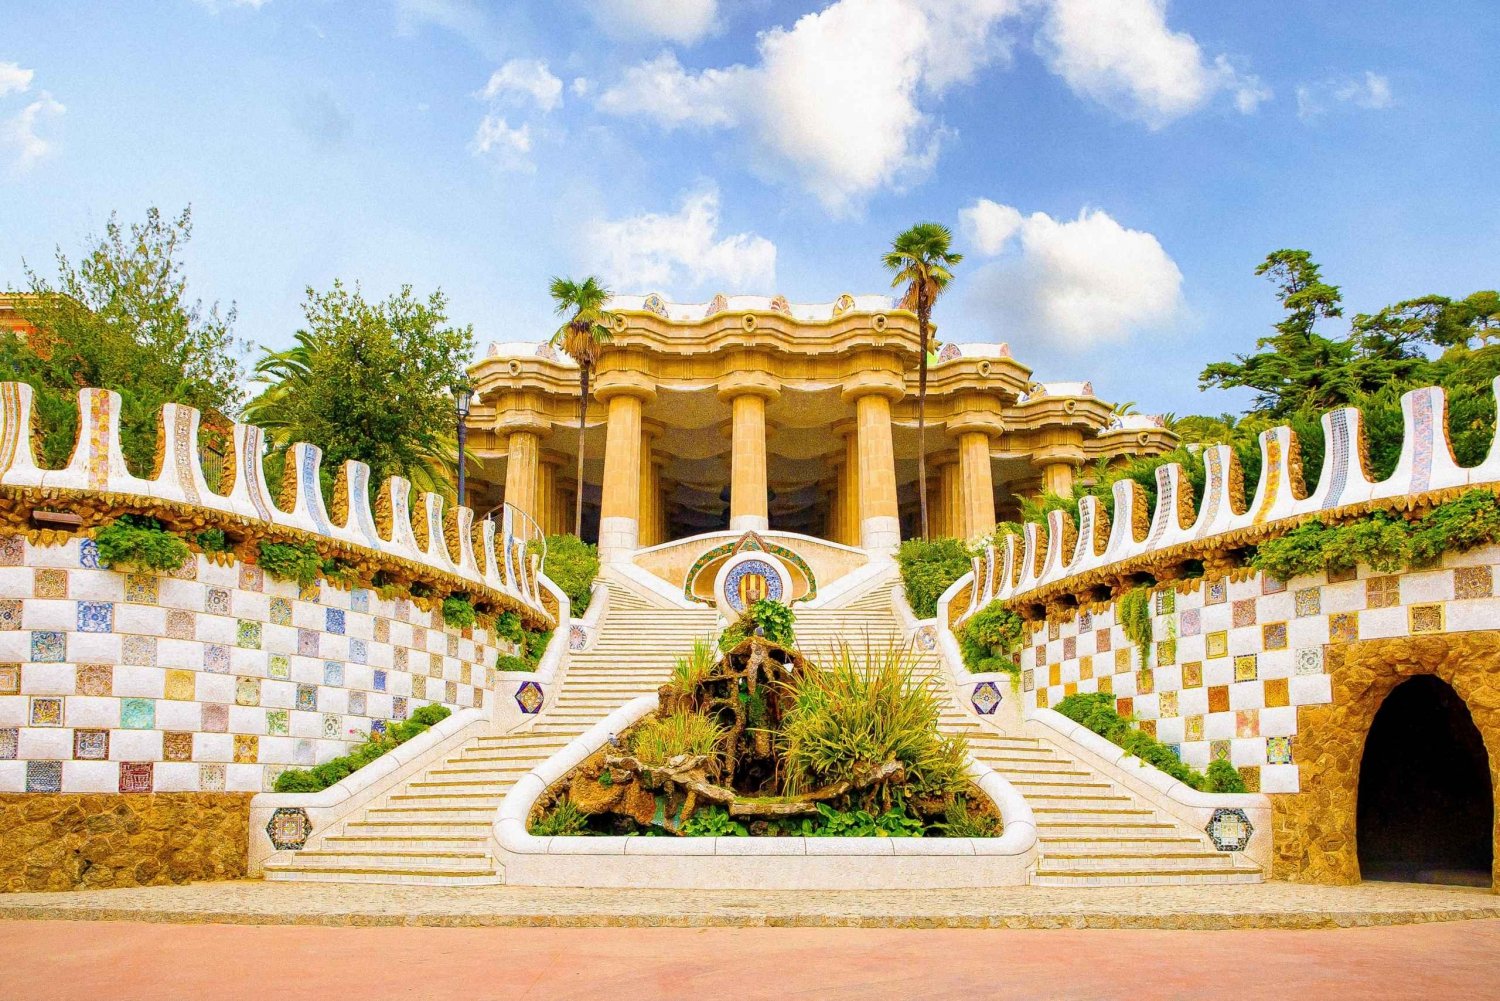 Barcelona: Park Güell Guided Tour with Fast-Track Ticket